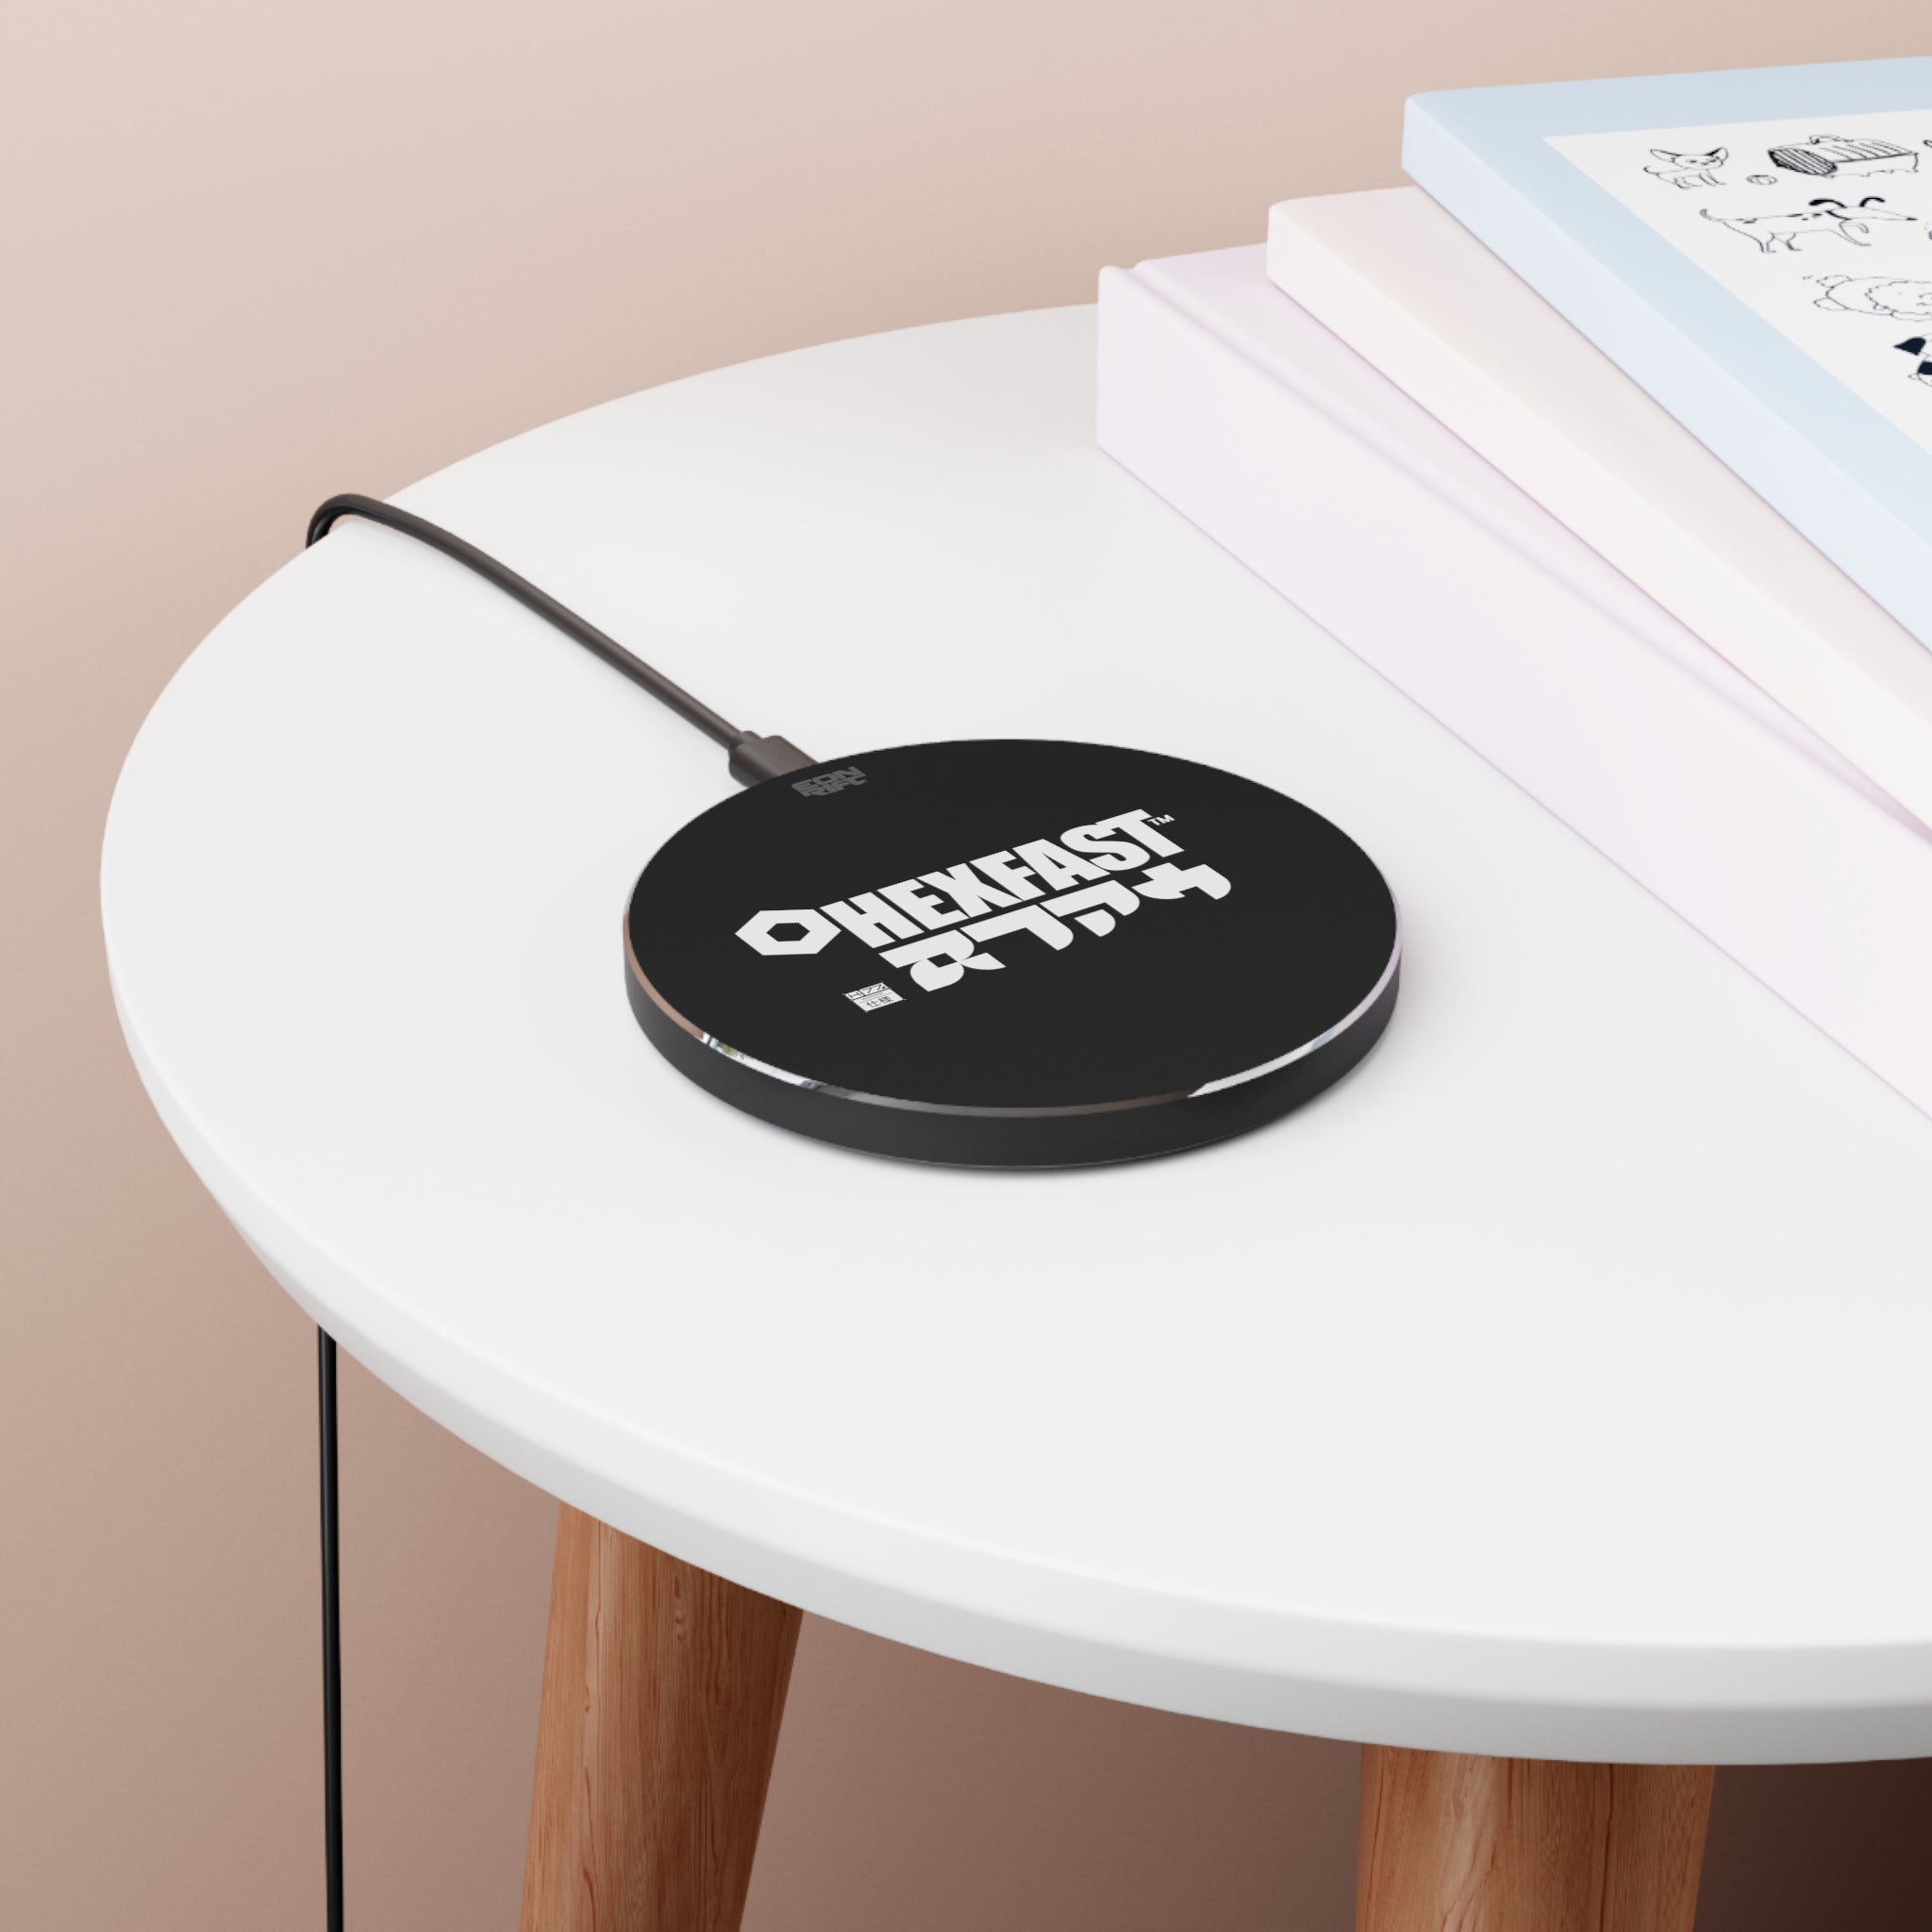 HEXFAST Wireless Charger